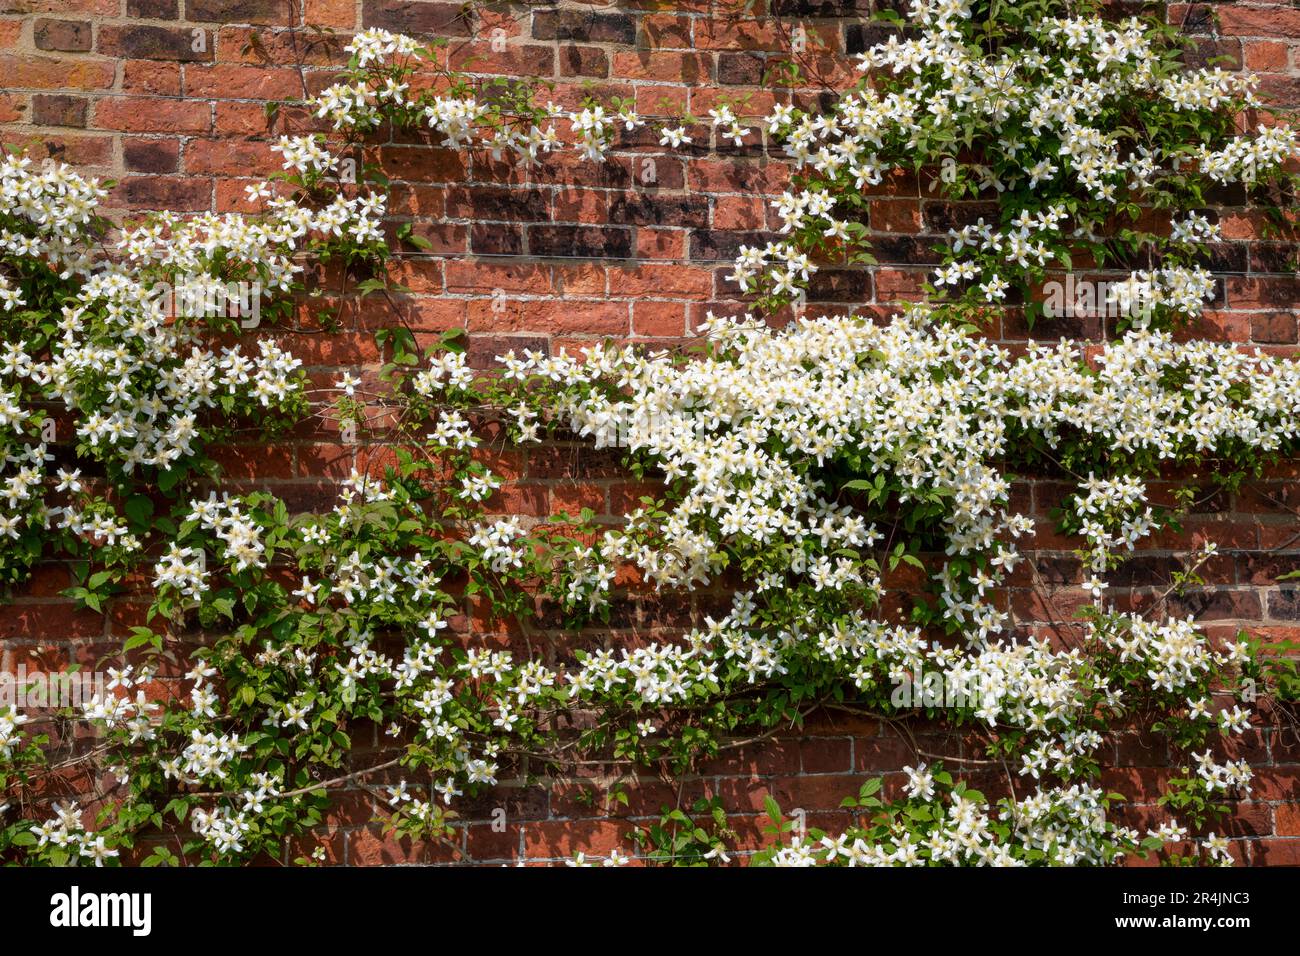 Clematis Montana Wilsonii in full flower against an old brick wall at RHS Bridgewater, Worsley Greater Manchester, England. Stock Photo